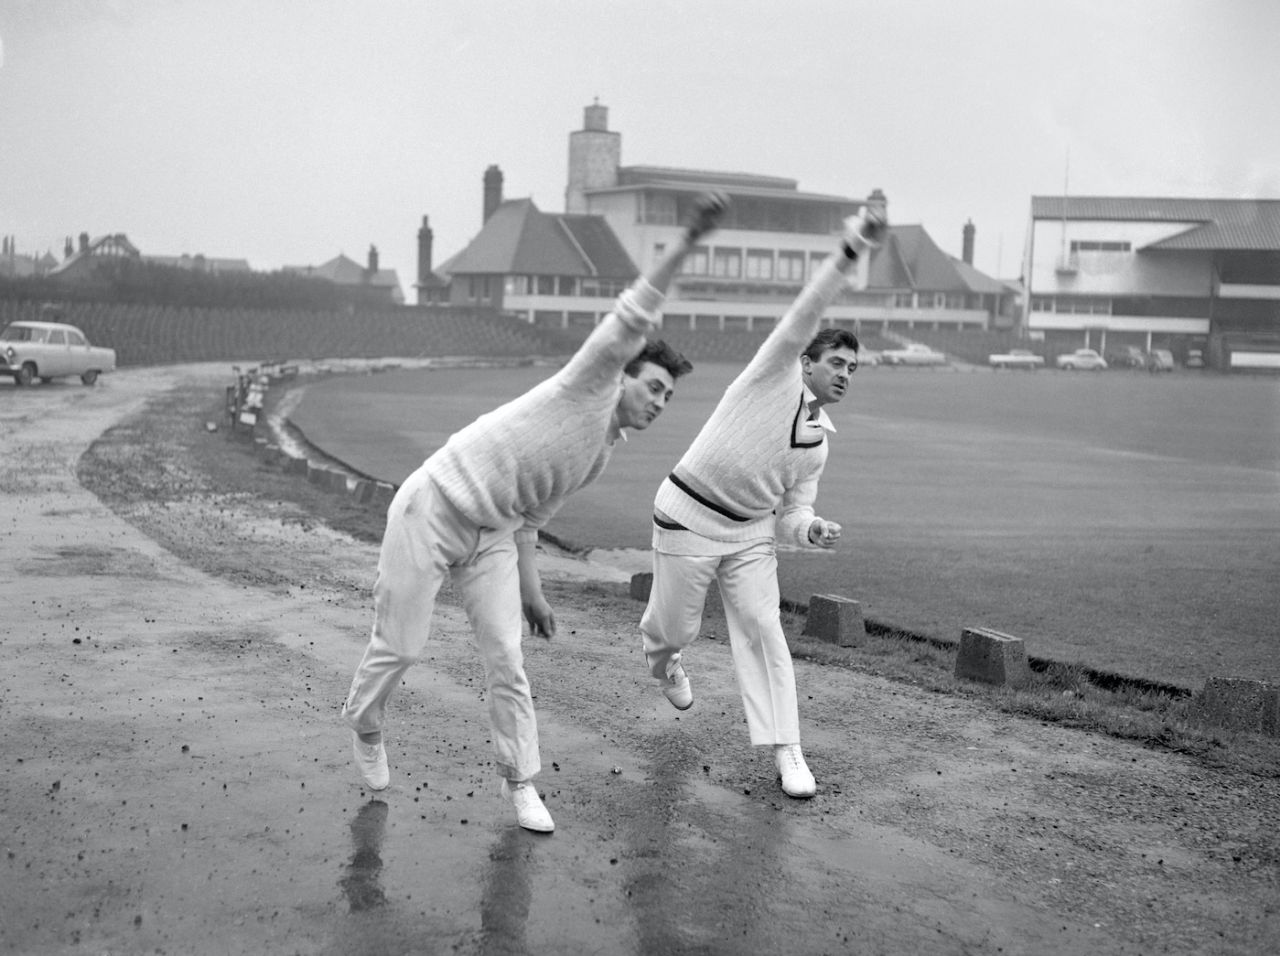 Fred Trueman, right, delivers the ball at the same time as his 18 year old brother Dennis Trueman, during practice at Headingley, Leeds, April 7, 1961